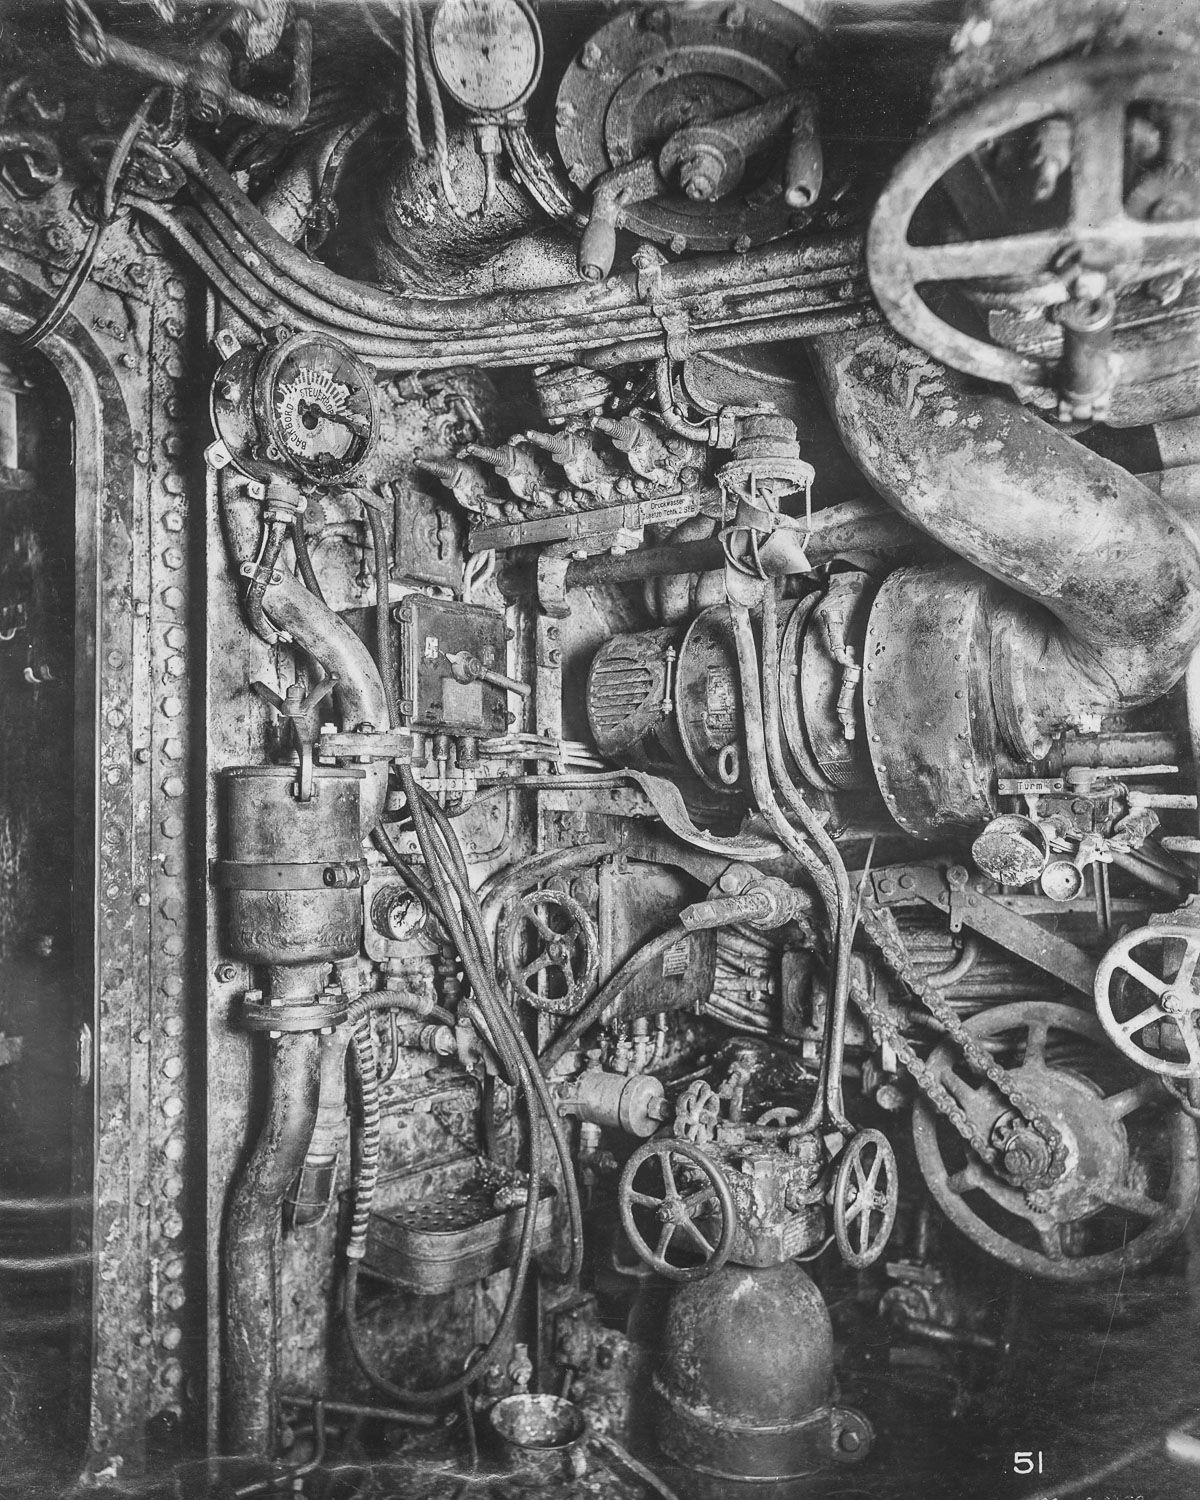 U-Boat 110: Ghostly Images Give a Rare Glimpse Into the Mechanics and